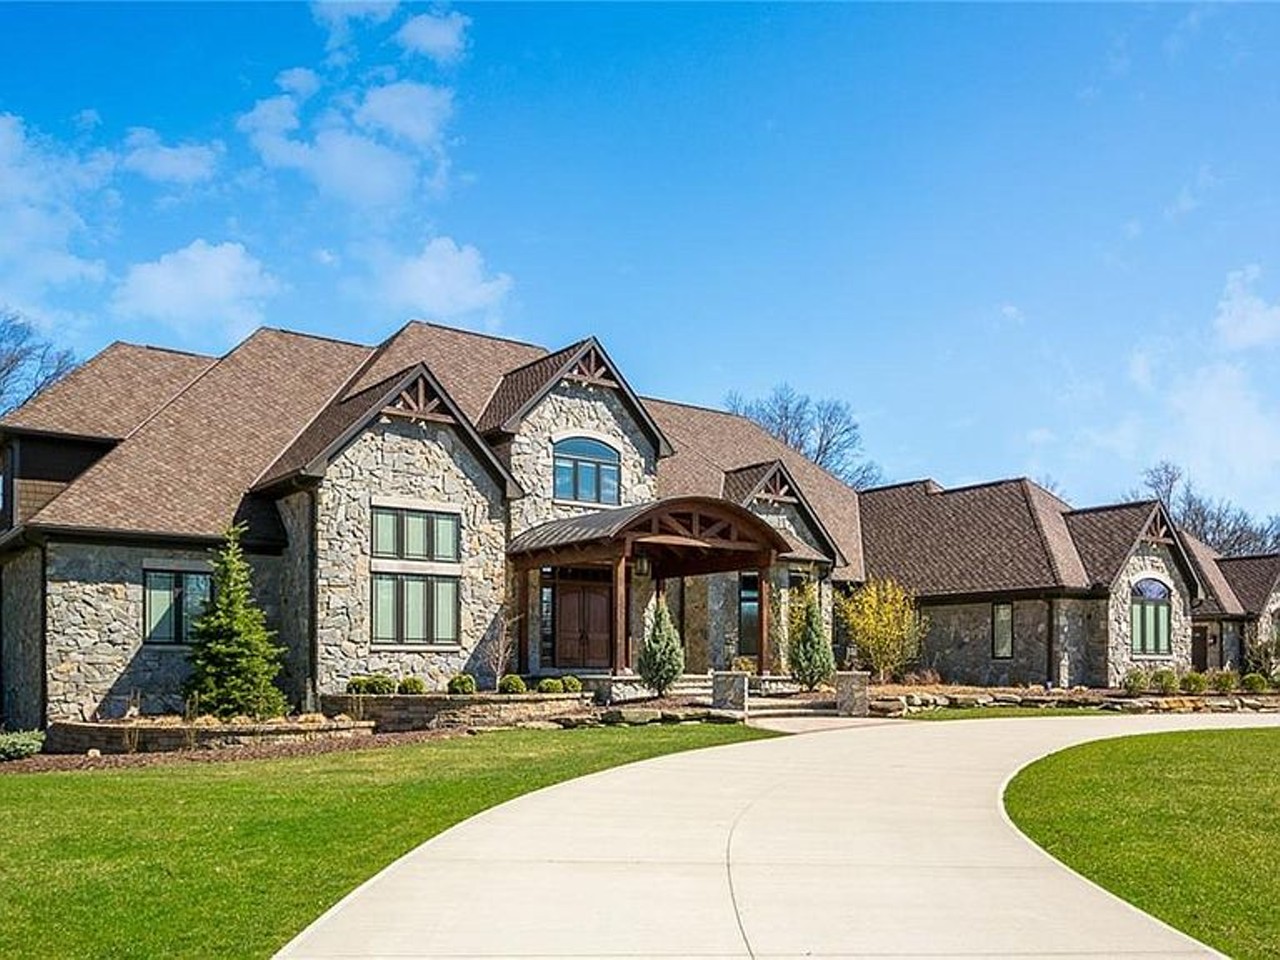 Get Your Own Restaurant-Quality Patio at This $4.5 Million Strongsville Mansion Complete With a Movie Theater and Indoor Bar